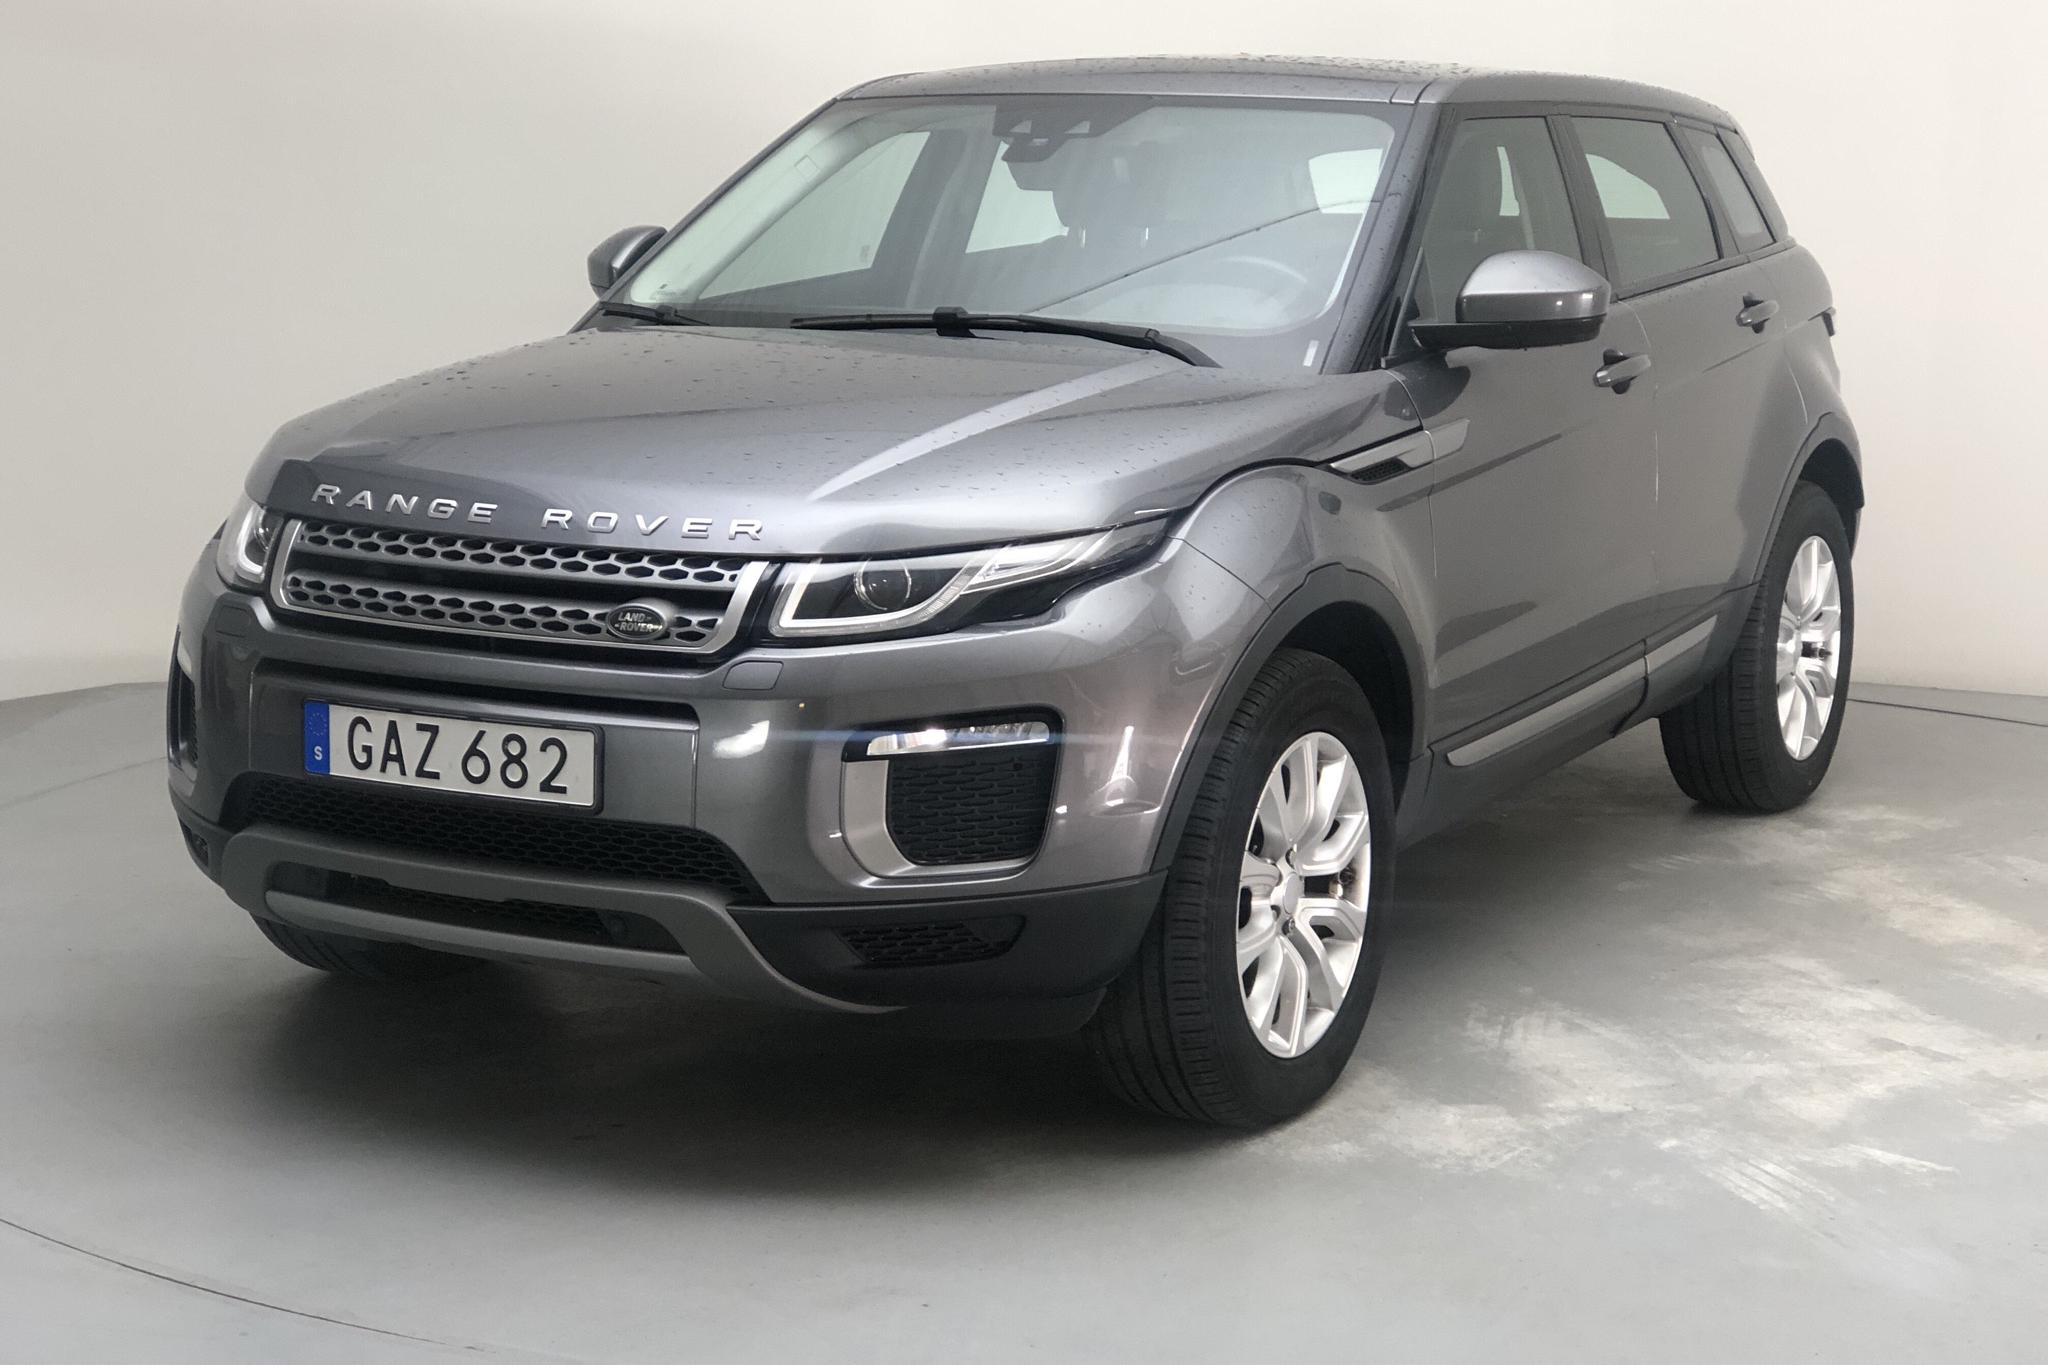 Land Rover Range Rover Evoque 2.0 TD4 AWD 5dr (150hk) - 100 220 km - Automatic - gray - 2017